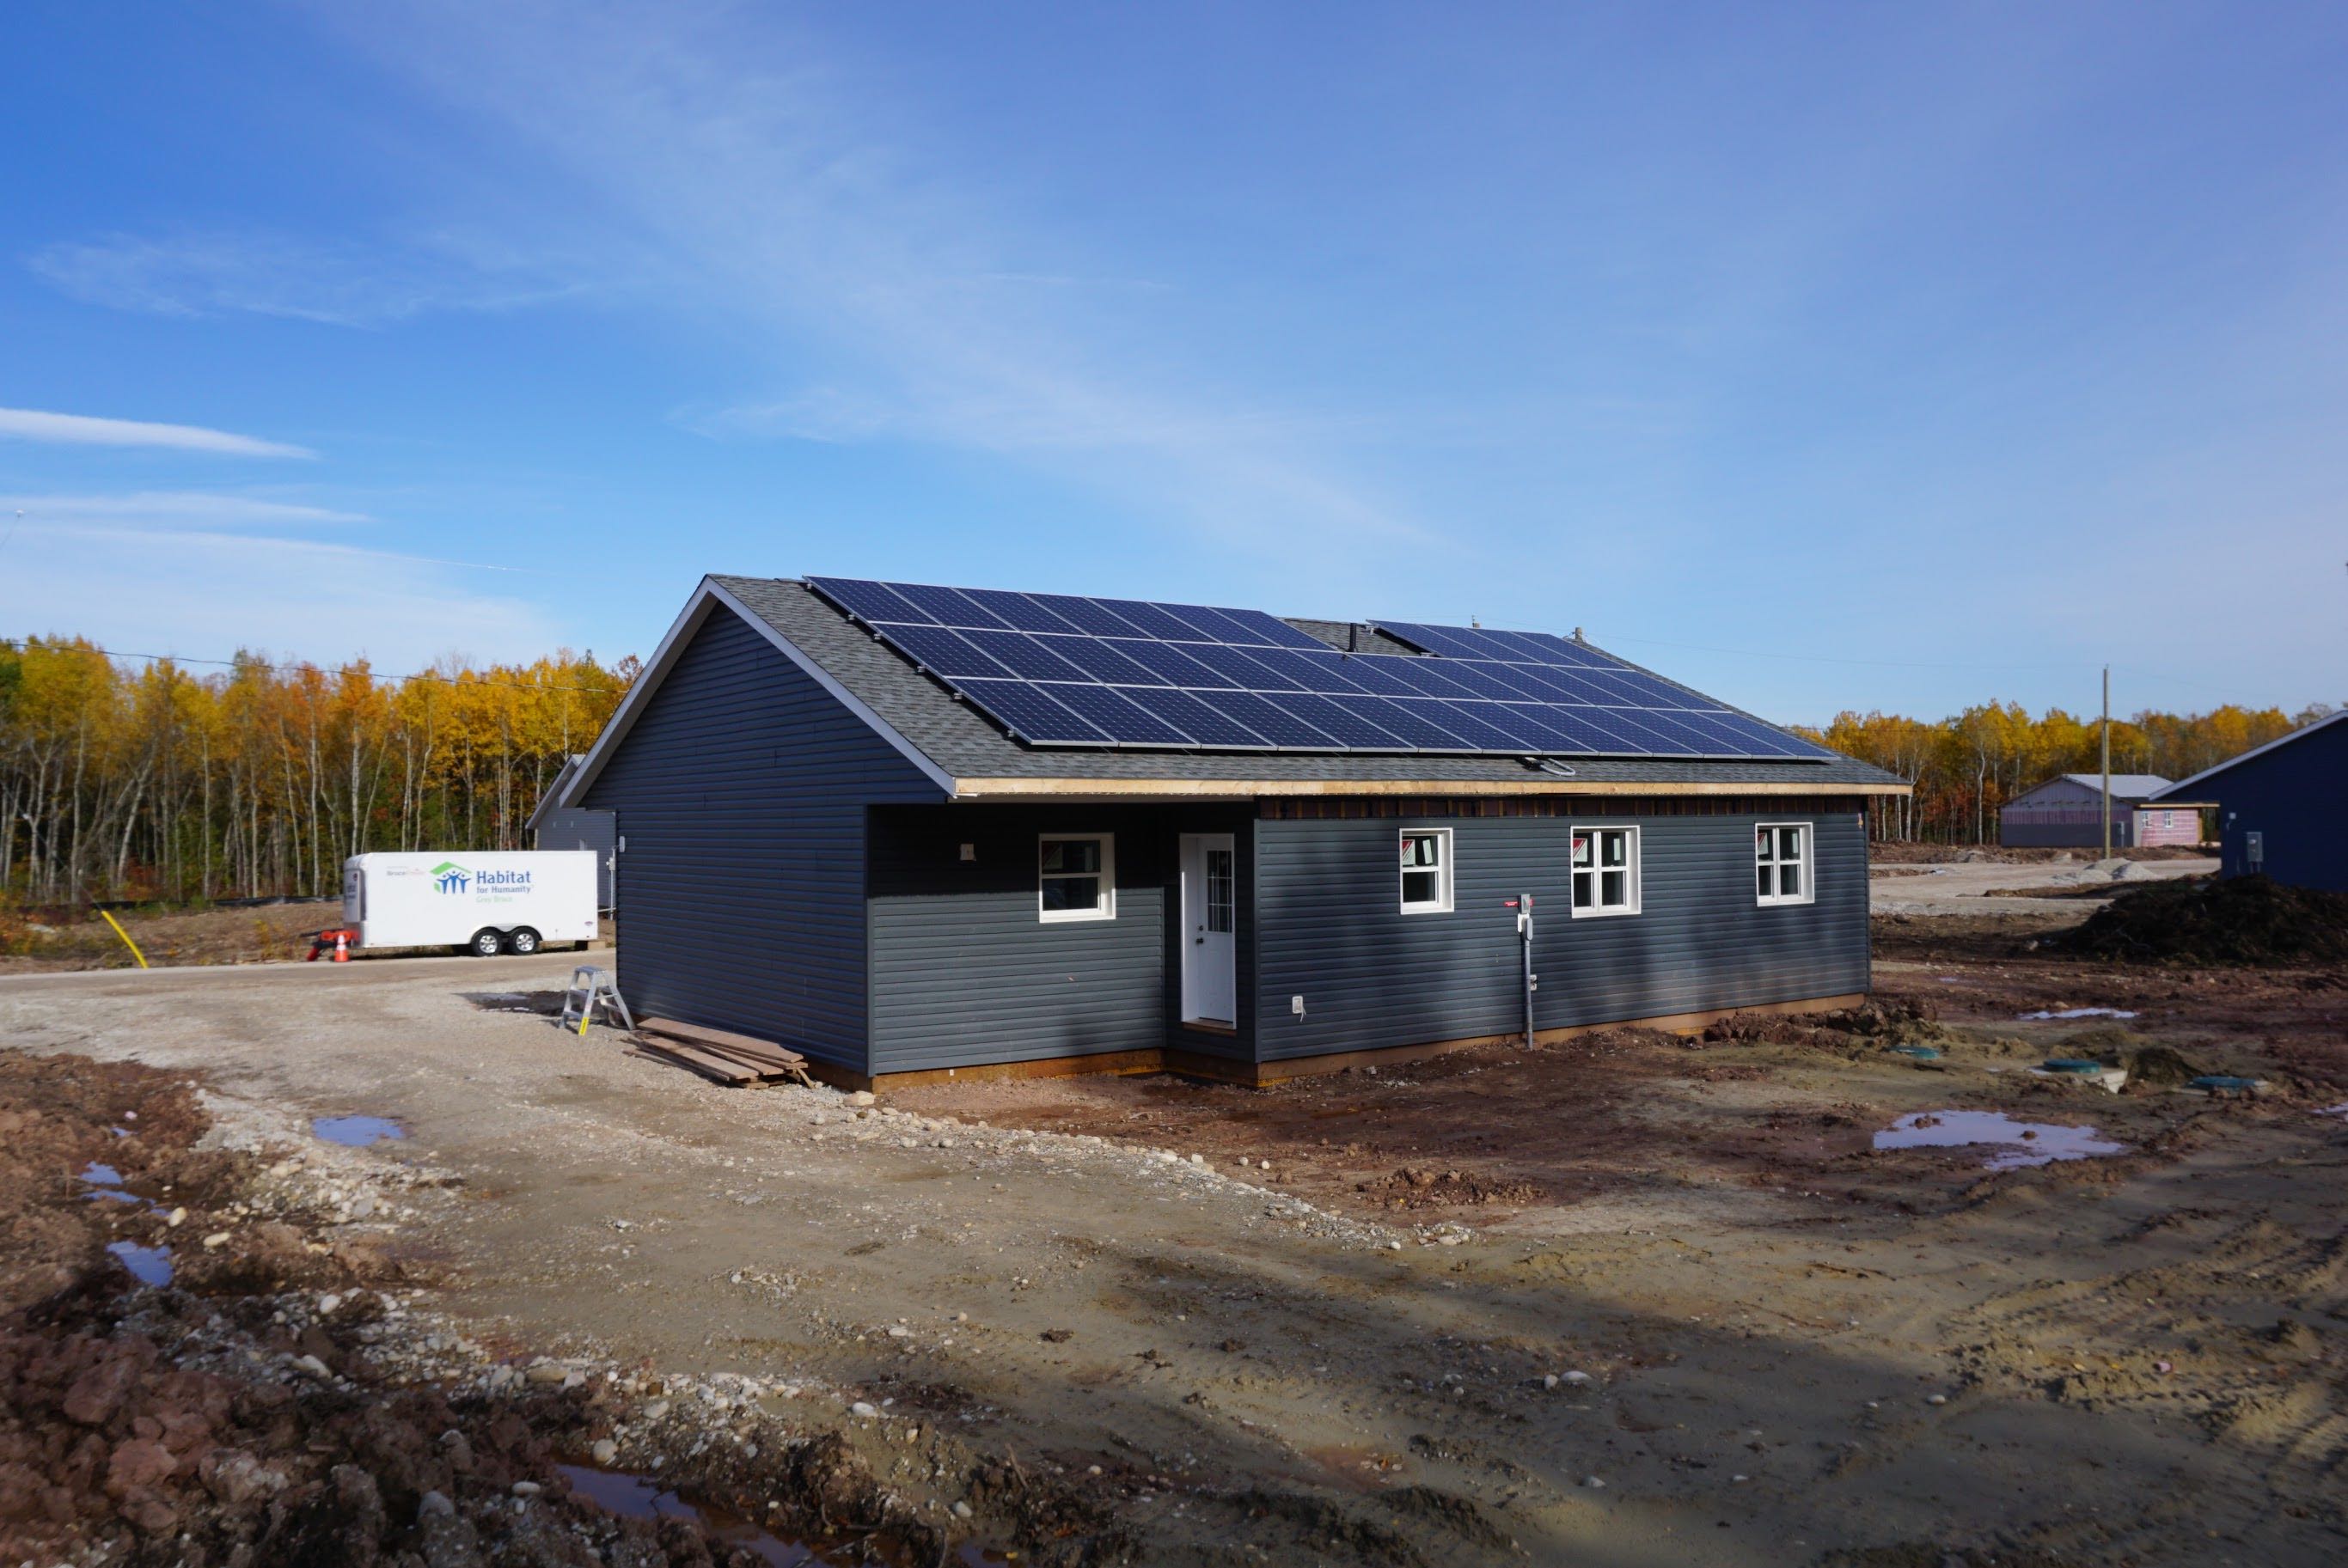 Photo of a newly constructed home with solar panels on the roof.